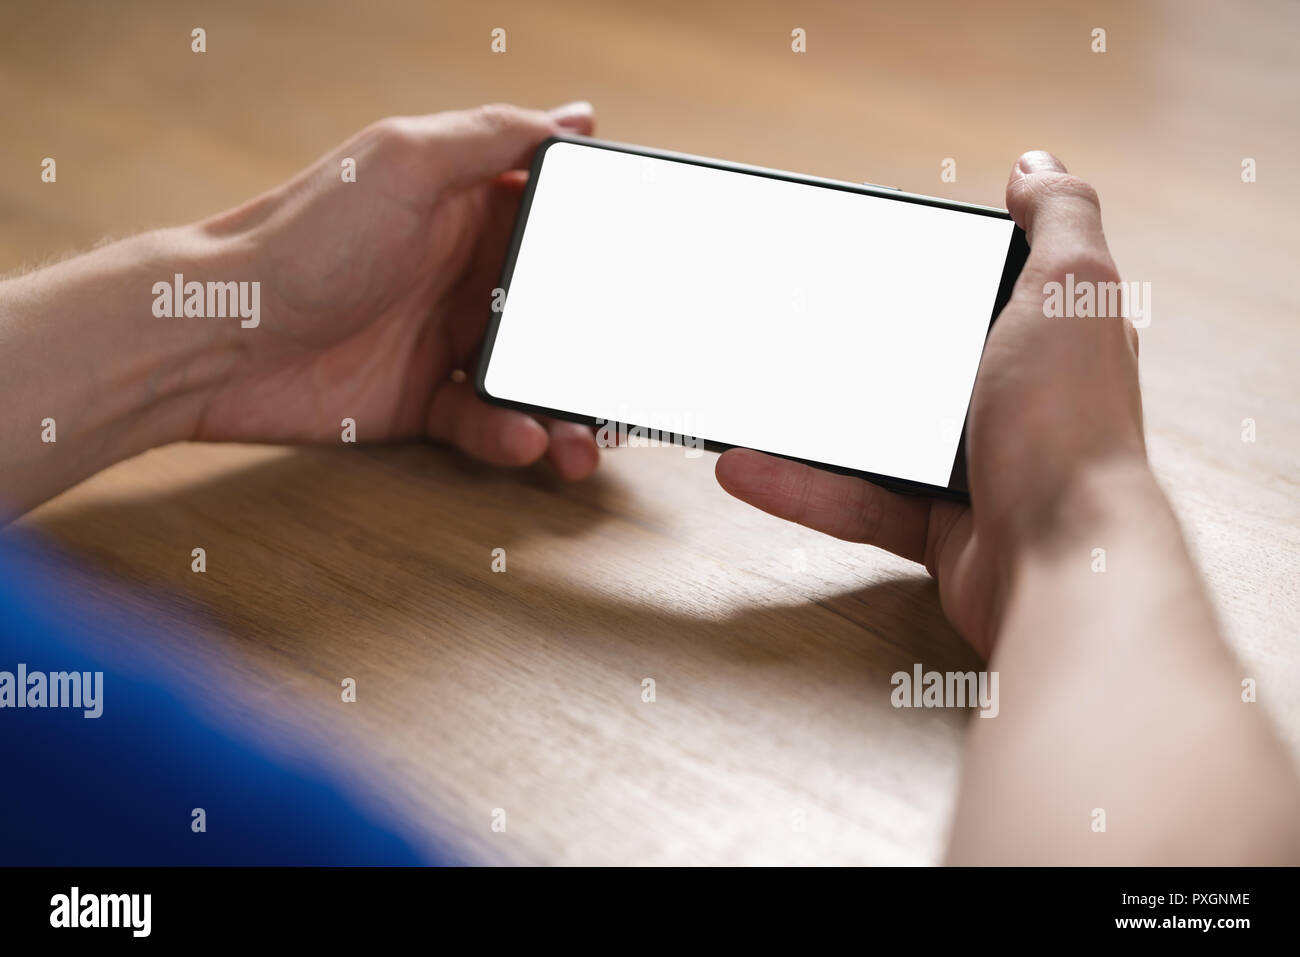 young man hands holding smartphone with blank white screen in landscape mode Stock Photo